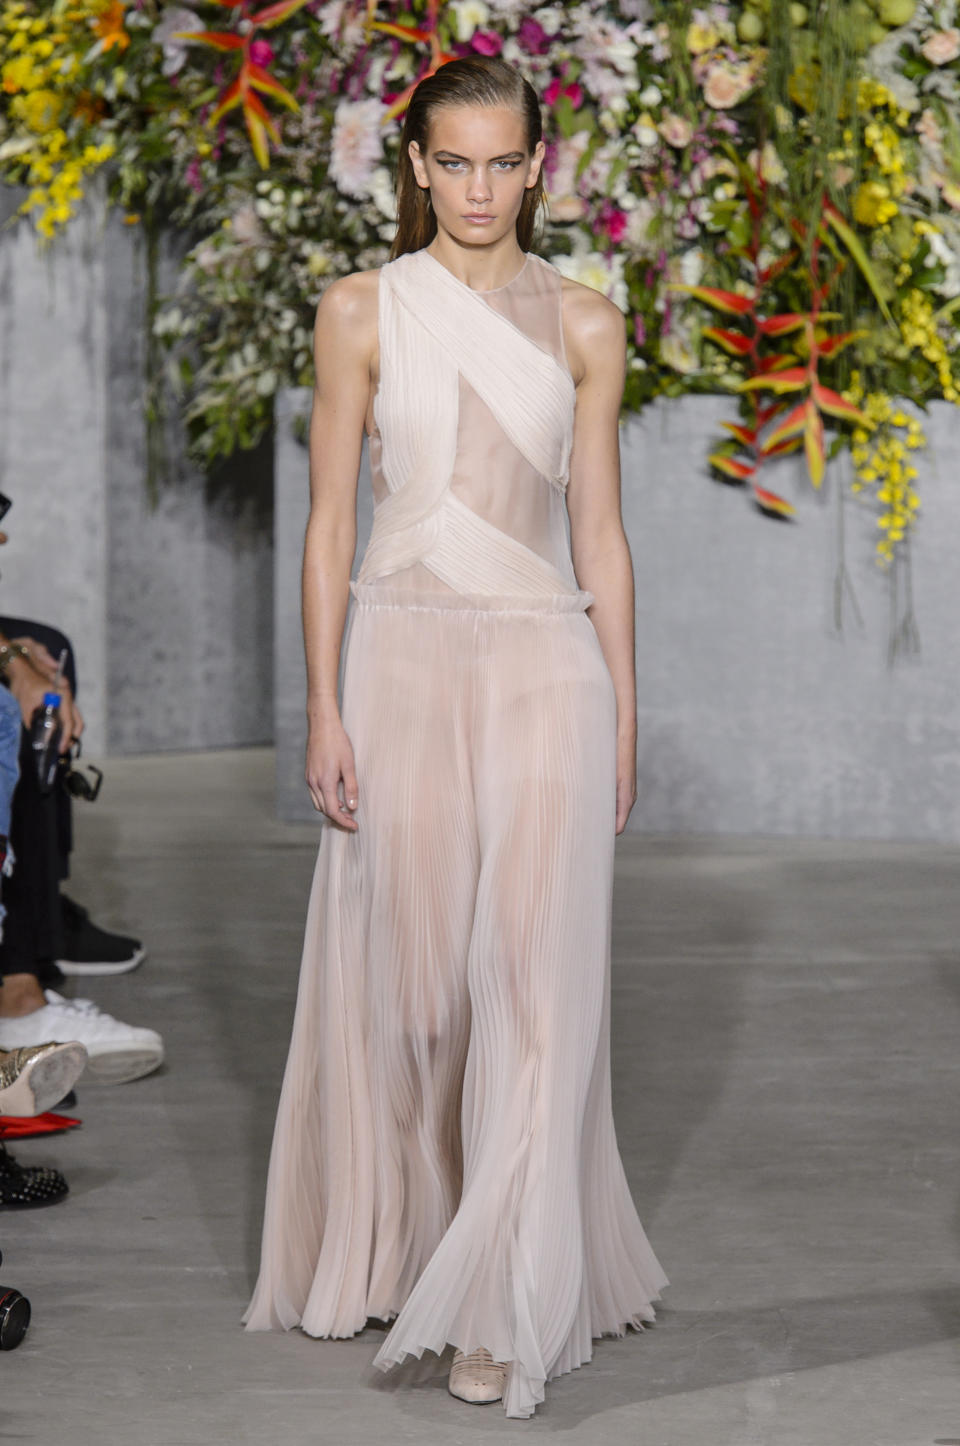 <p><i>A model wears a semi-sheer Grecian-style dress from the SS18 Jason Wu collection. (Photo: ImaxTree) </i></p>